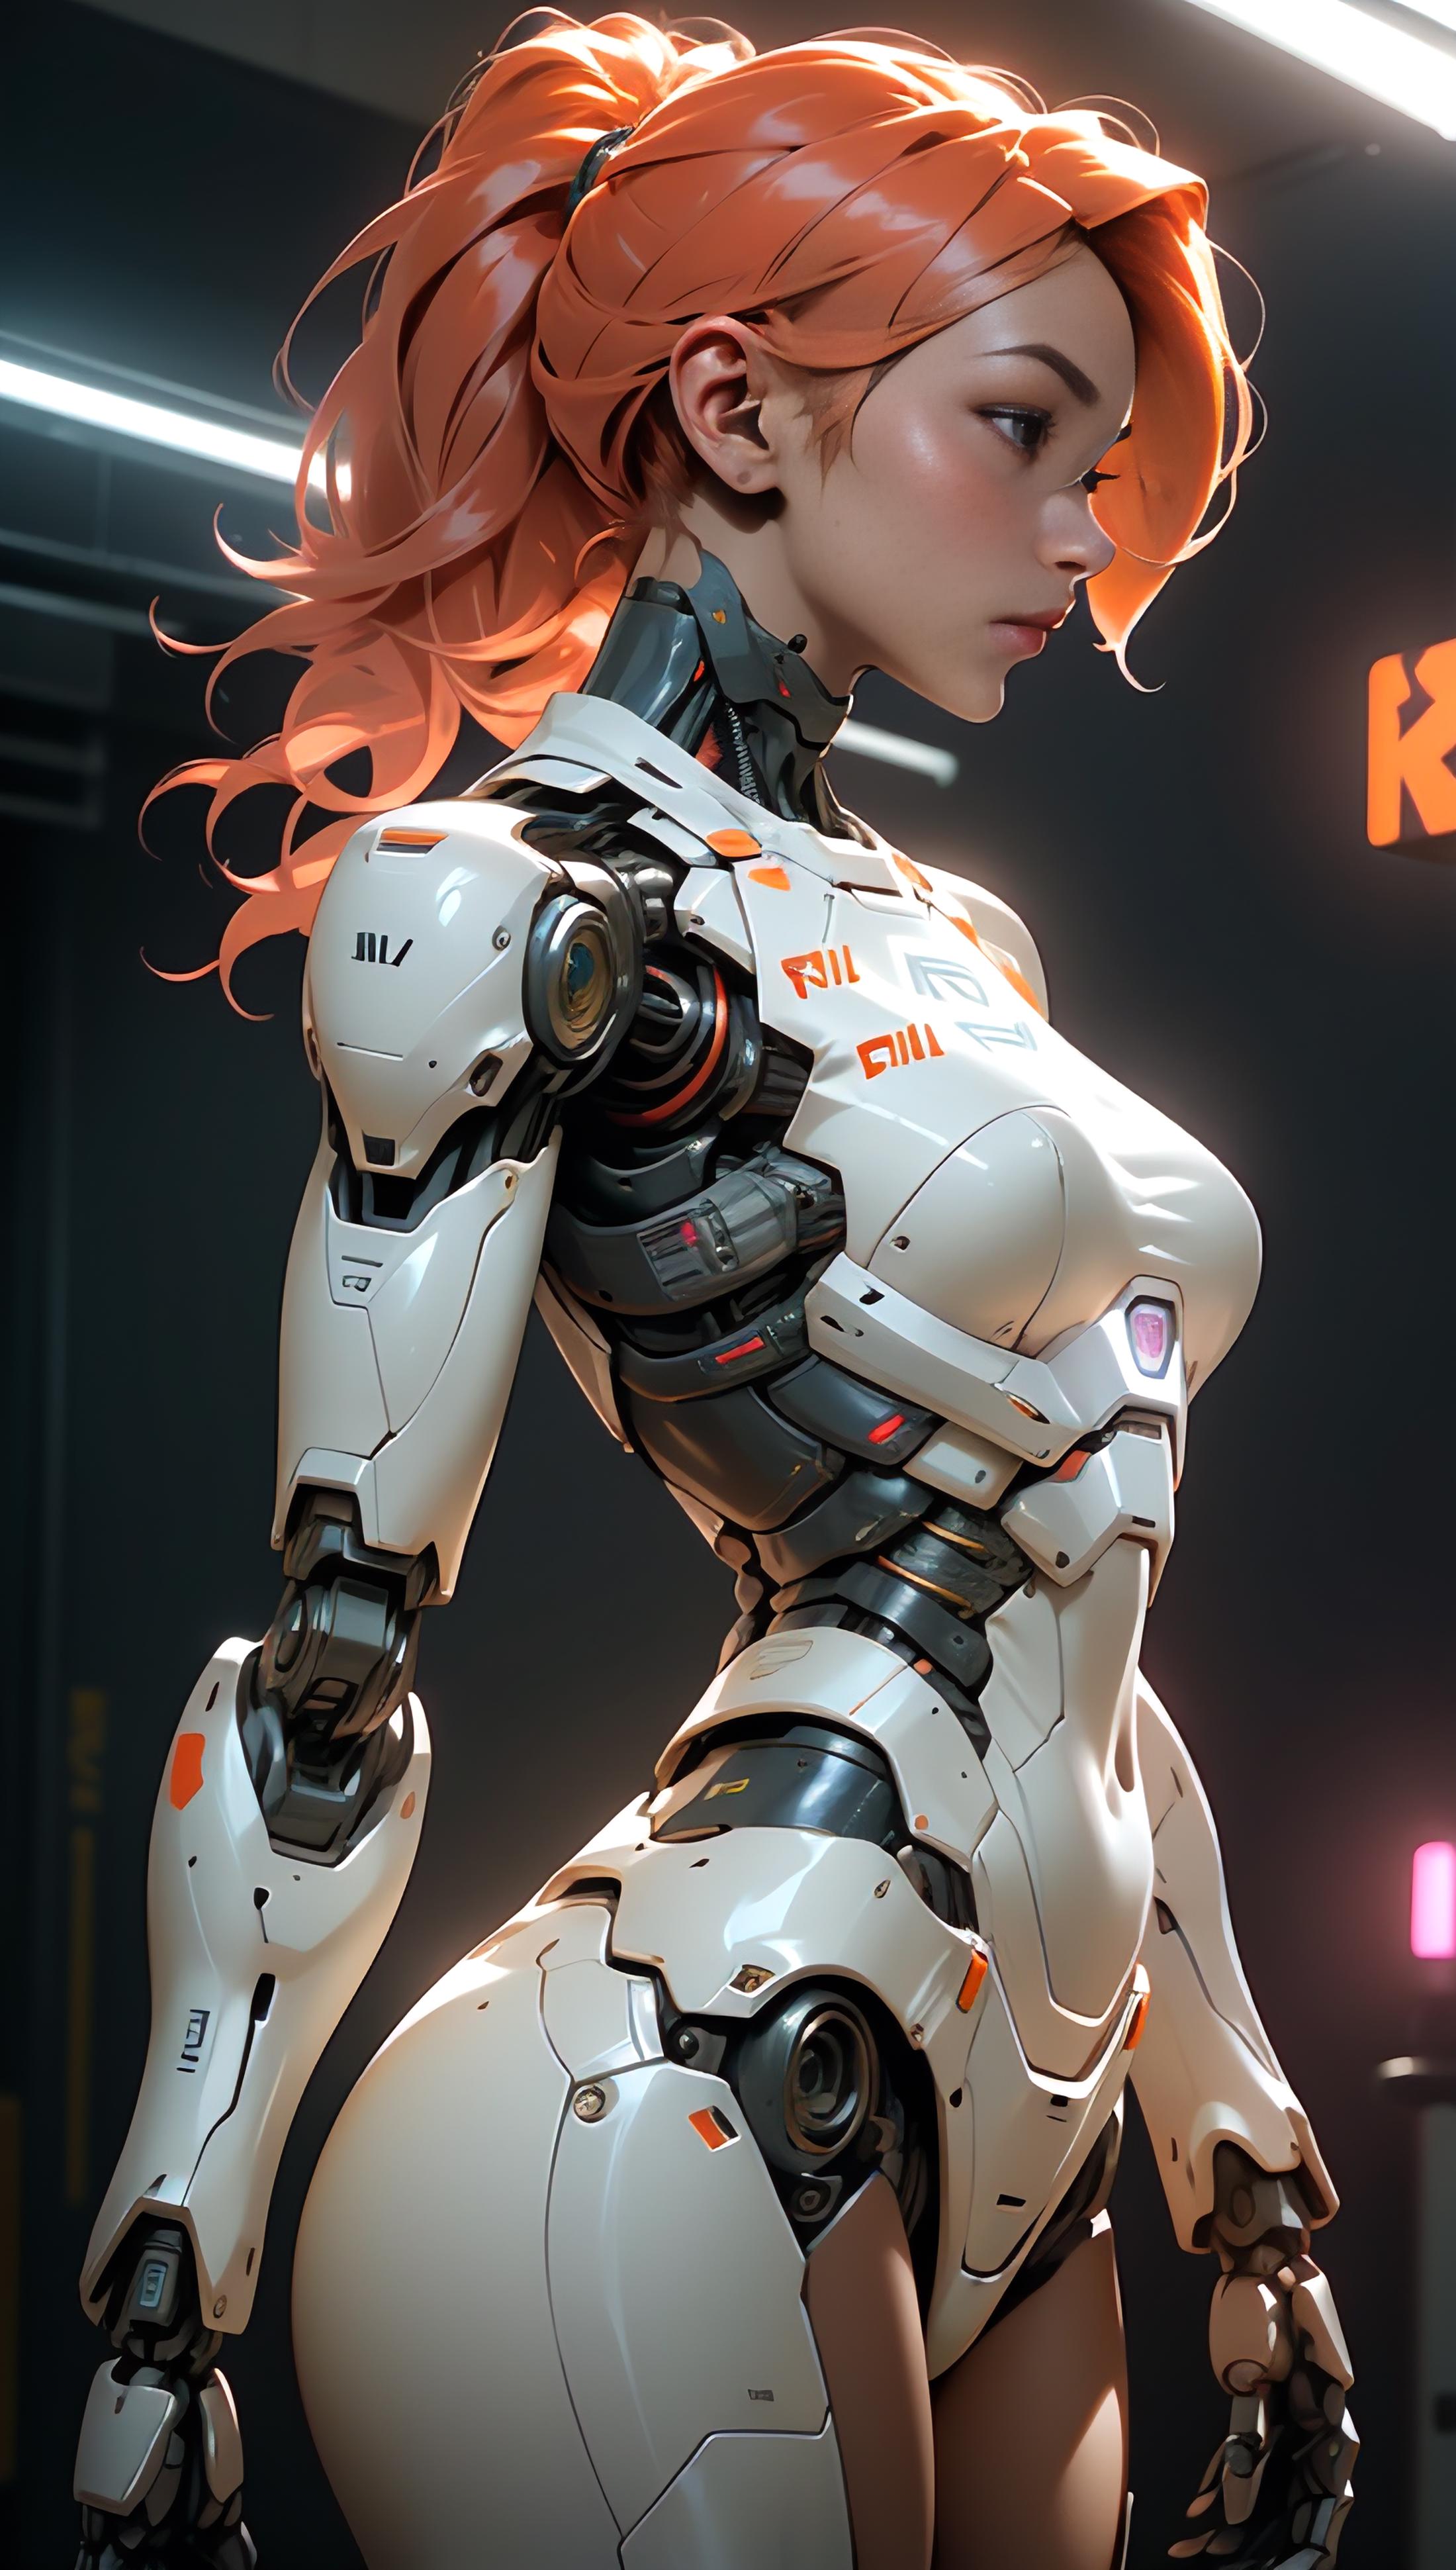 White and Orange Robot Woman with Glowing Eyes and Red Hair.